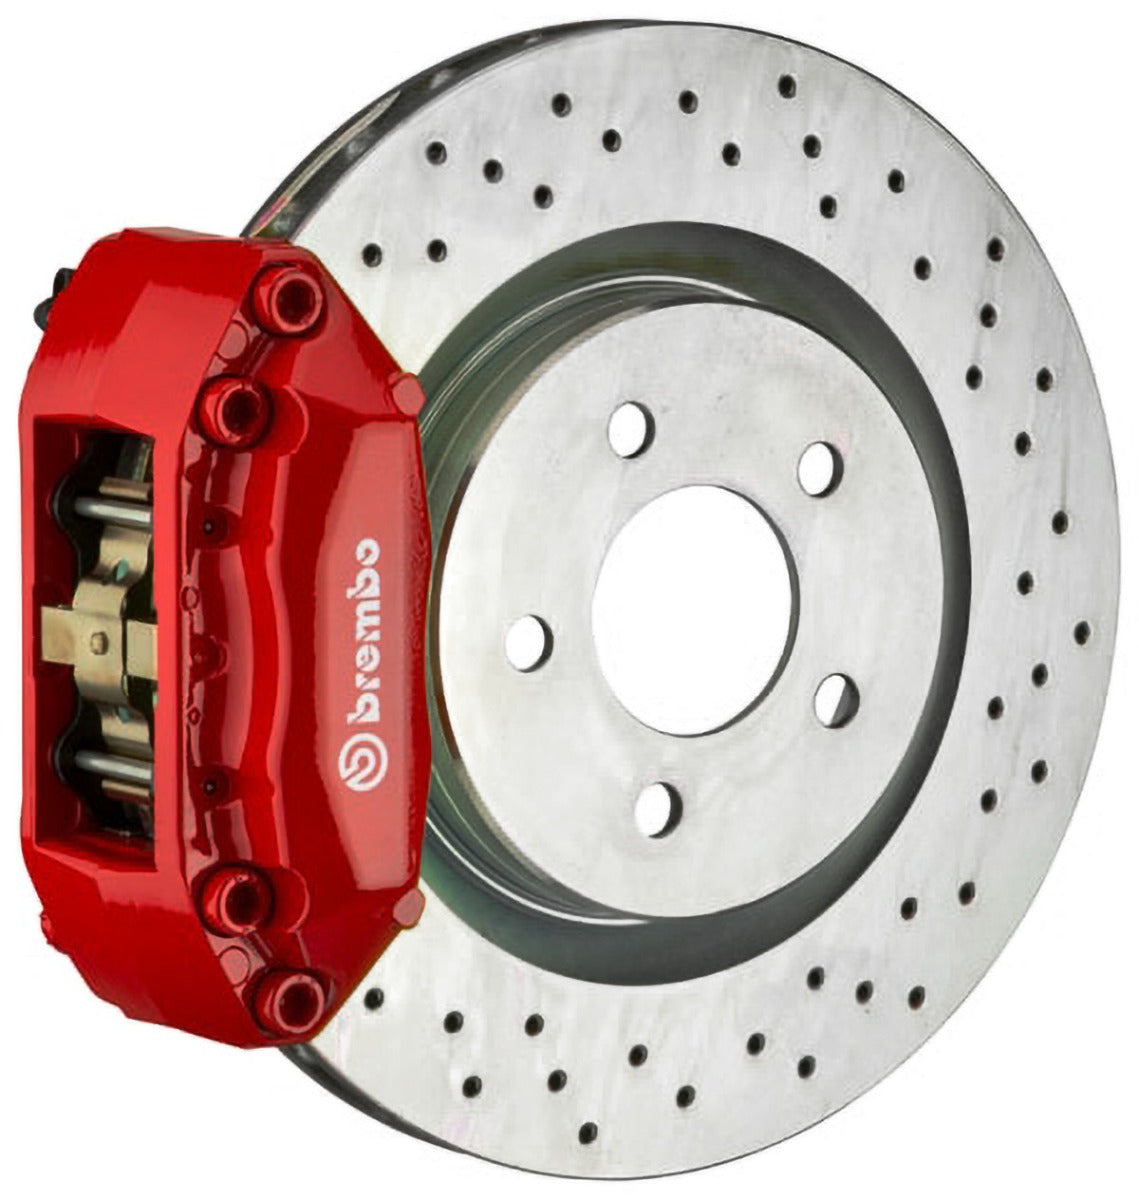 Brembo Brakes Front 330x28 One Piece Rotors + Four Piston Calipers